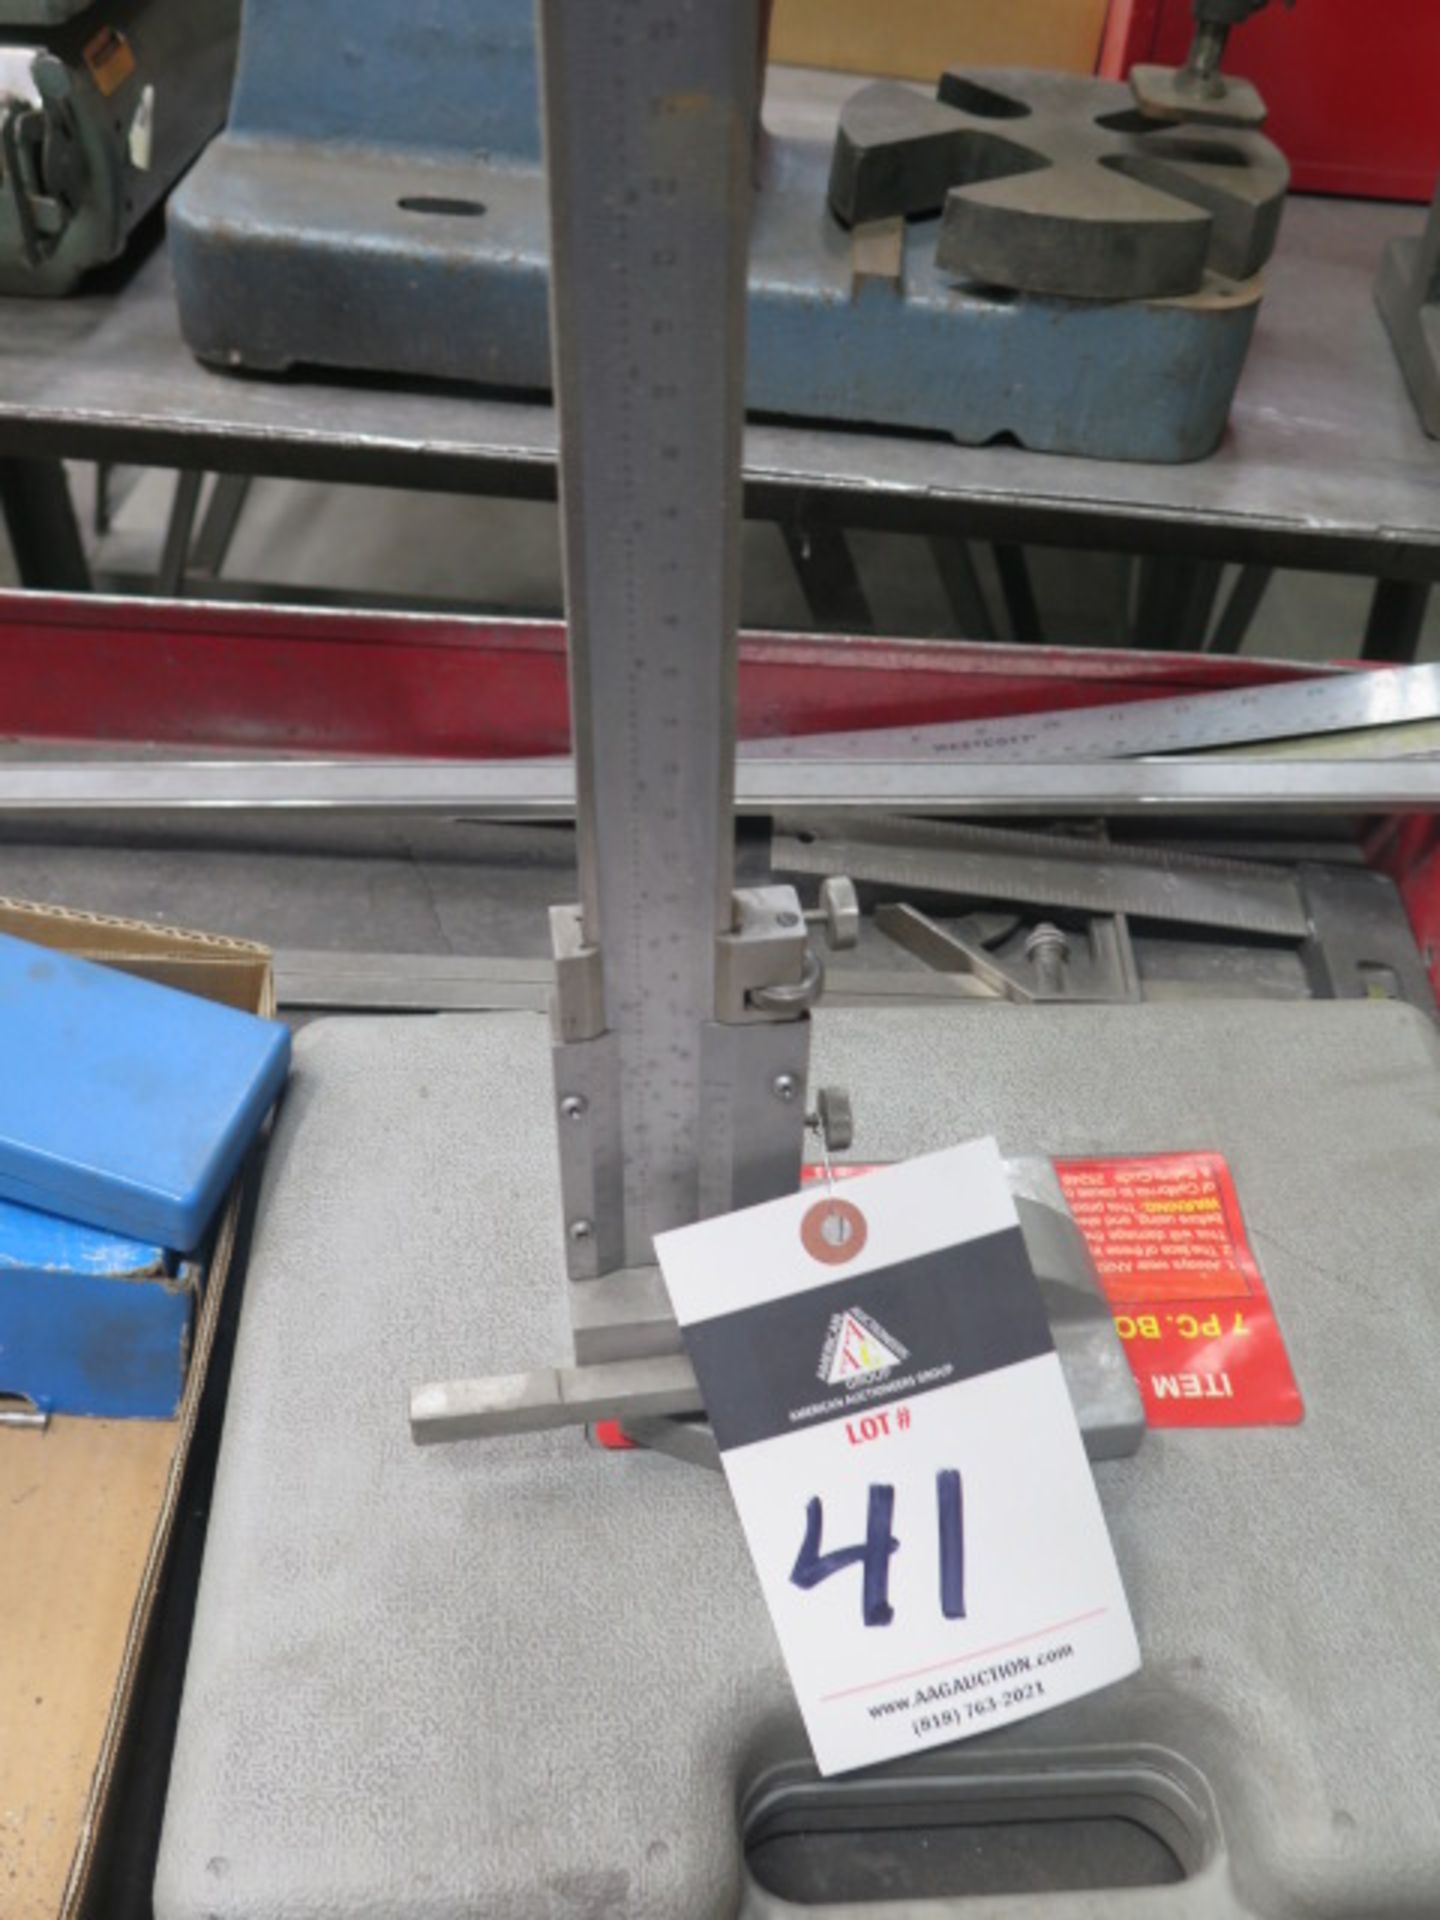 Fowler 12" Vernier Height Gage, Links Universal Indicator, Dial Test Indicators and Angle Blocks - Image 2 of 7